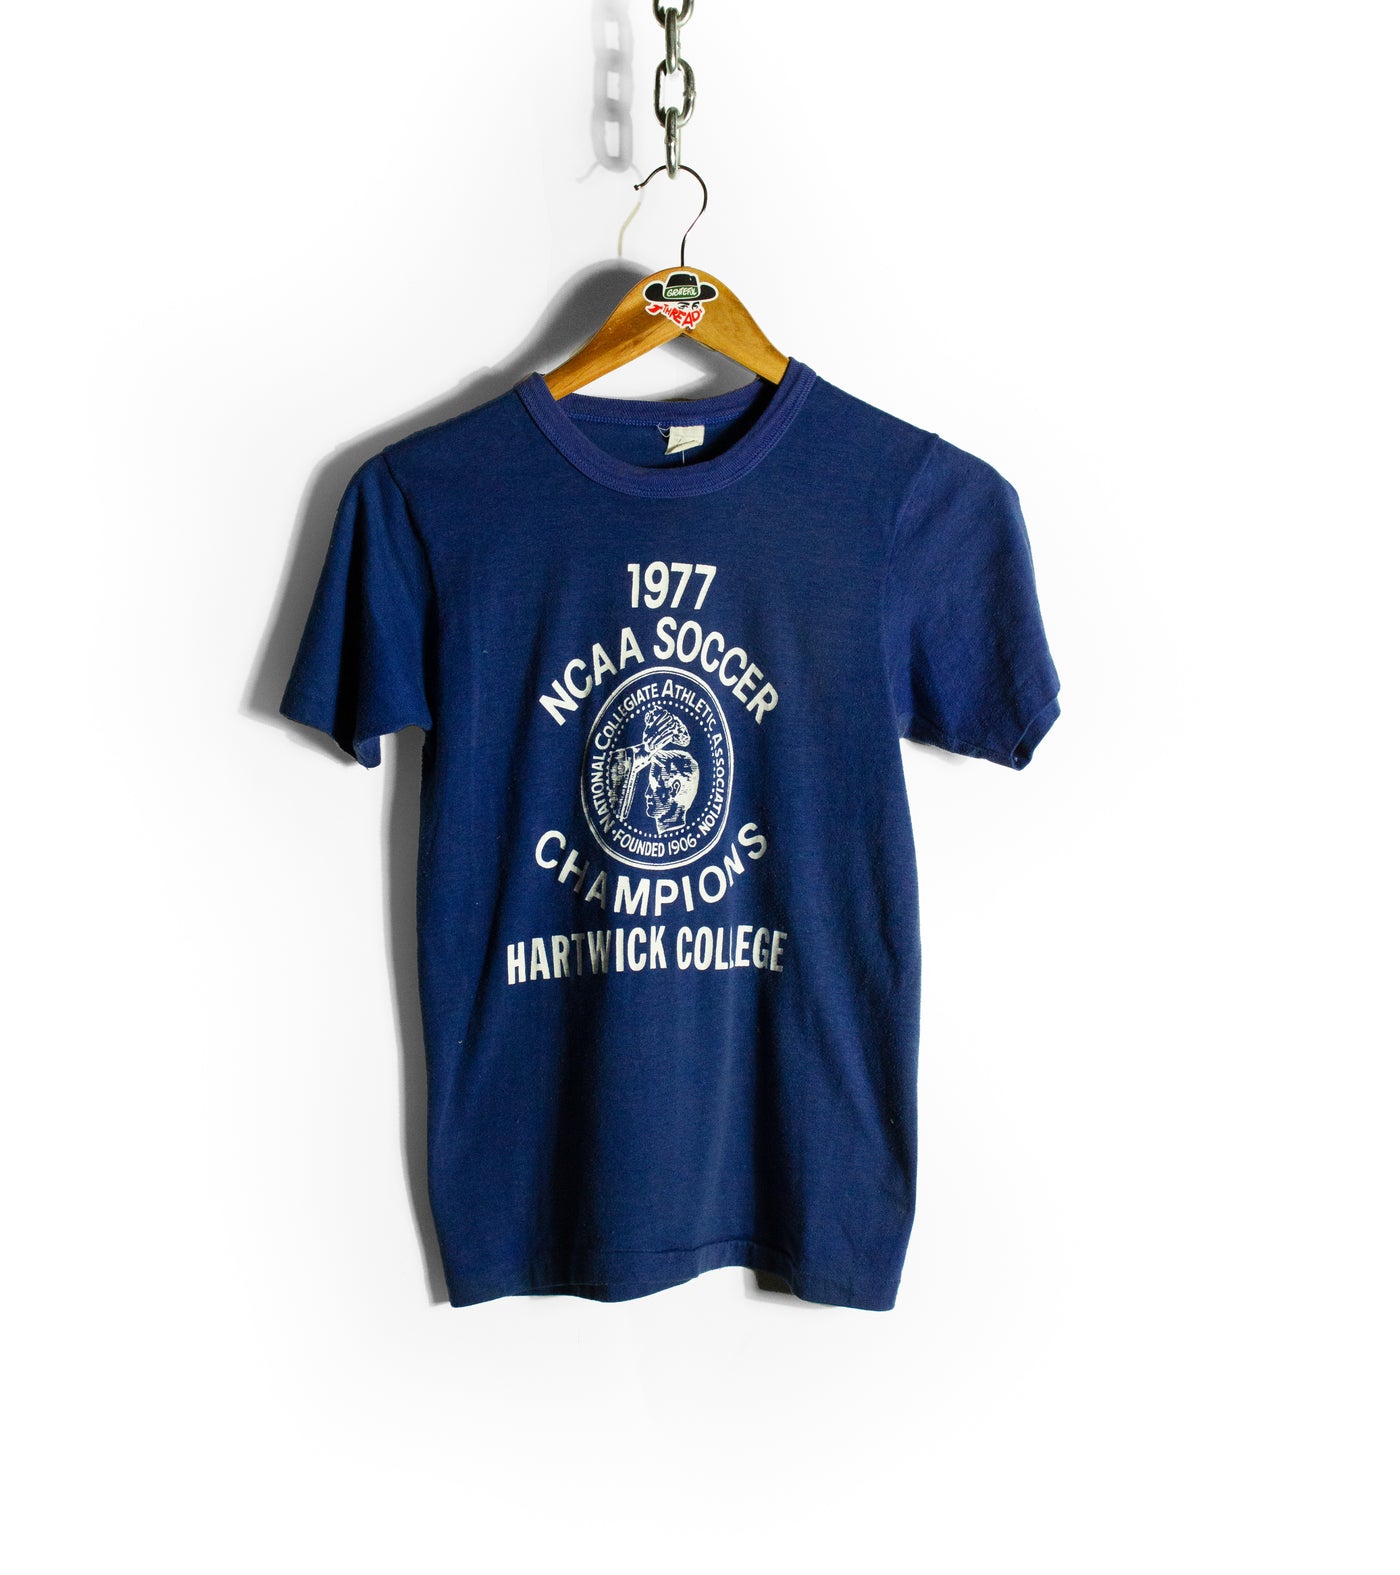 Vintage 1977 Hartwick College Soccer National Champions T-Shirt